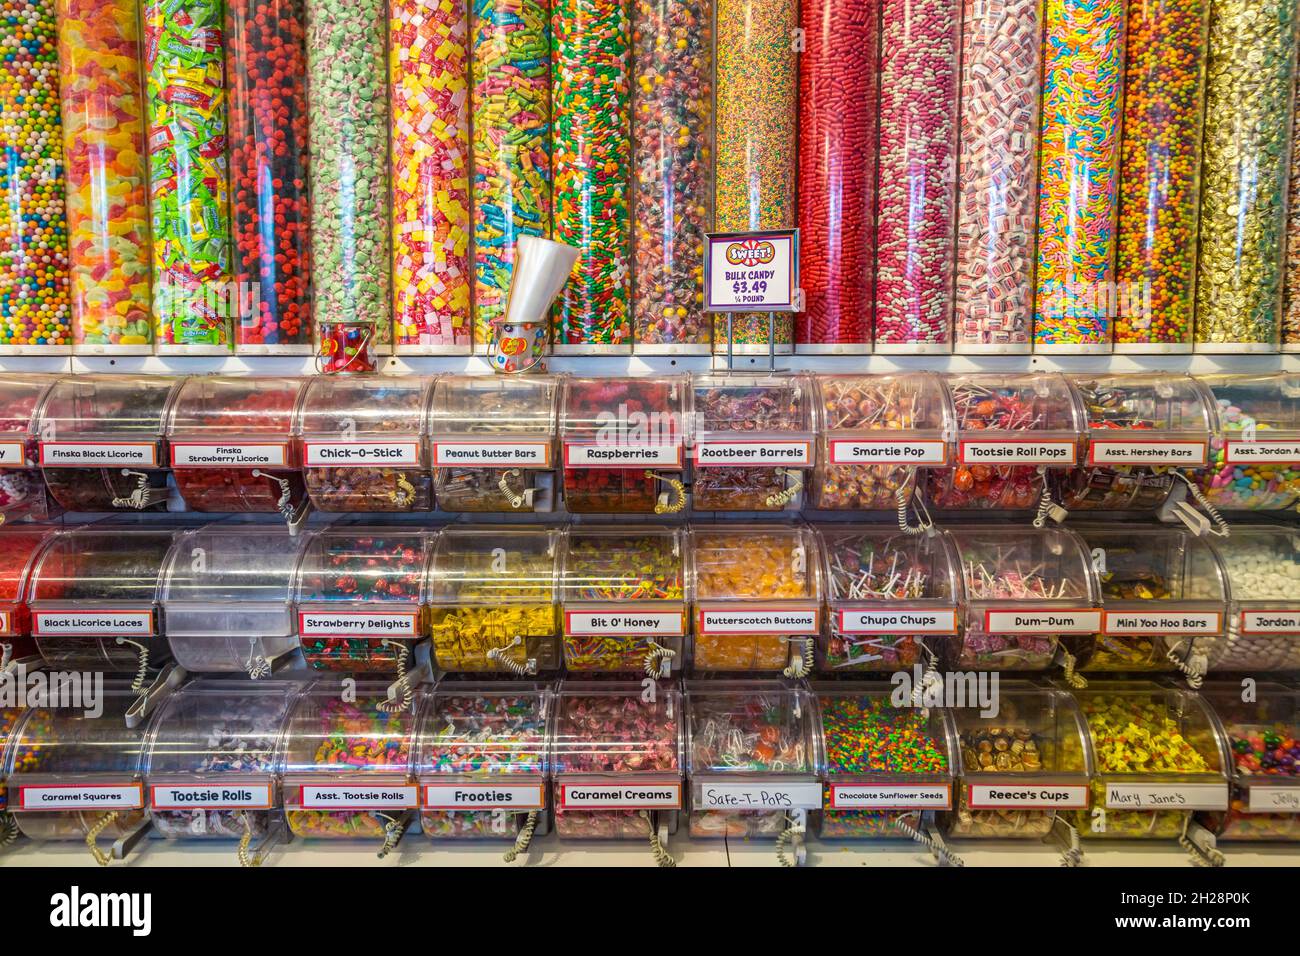 Display Of Candies In The Sweet Candy Store At The Island Recreation